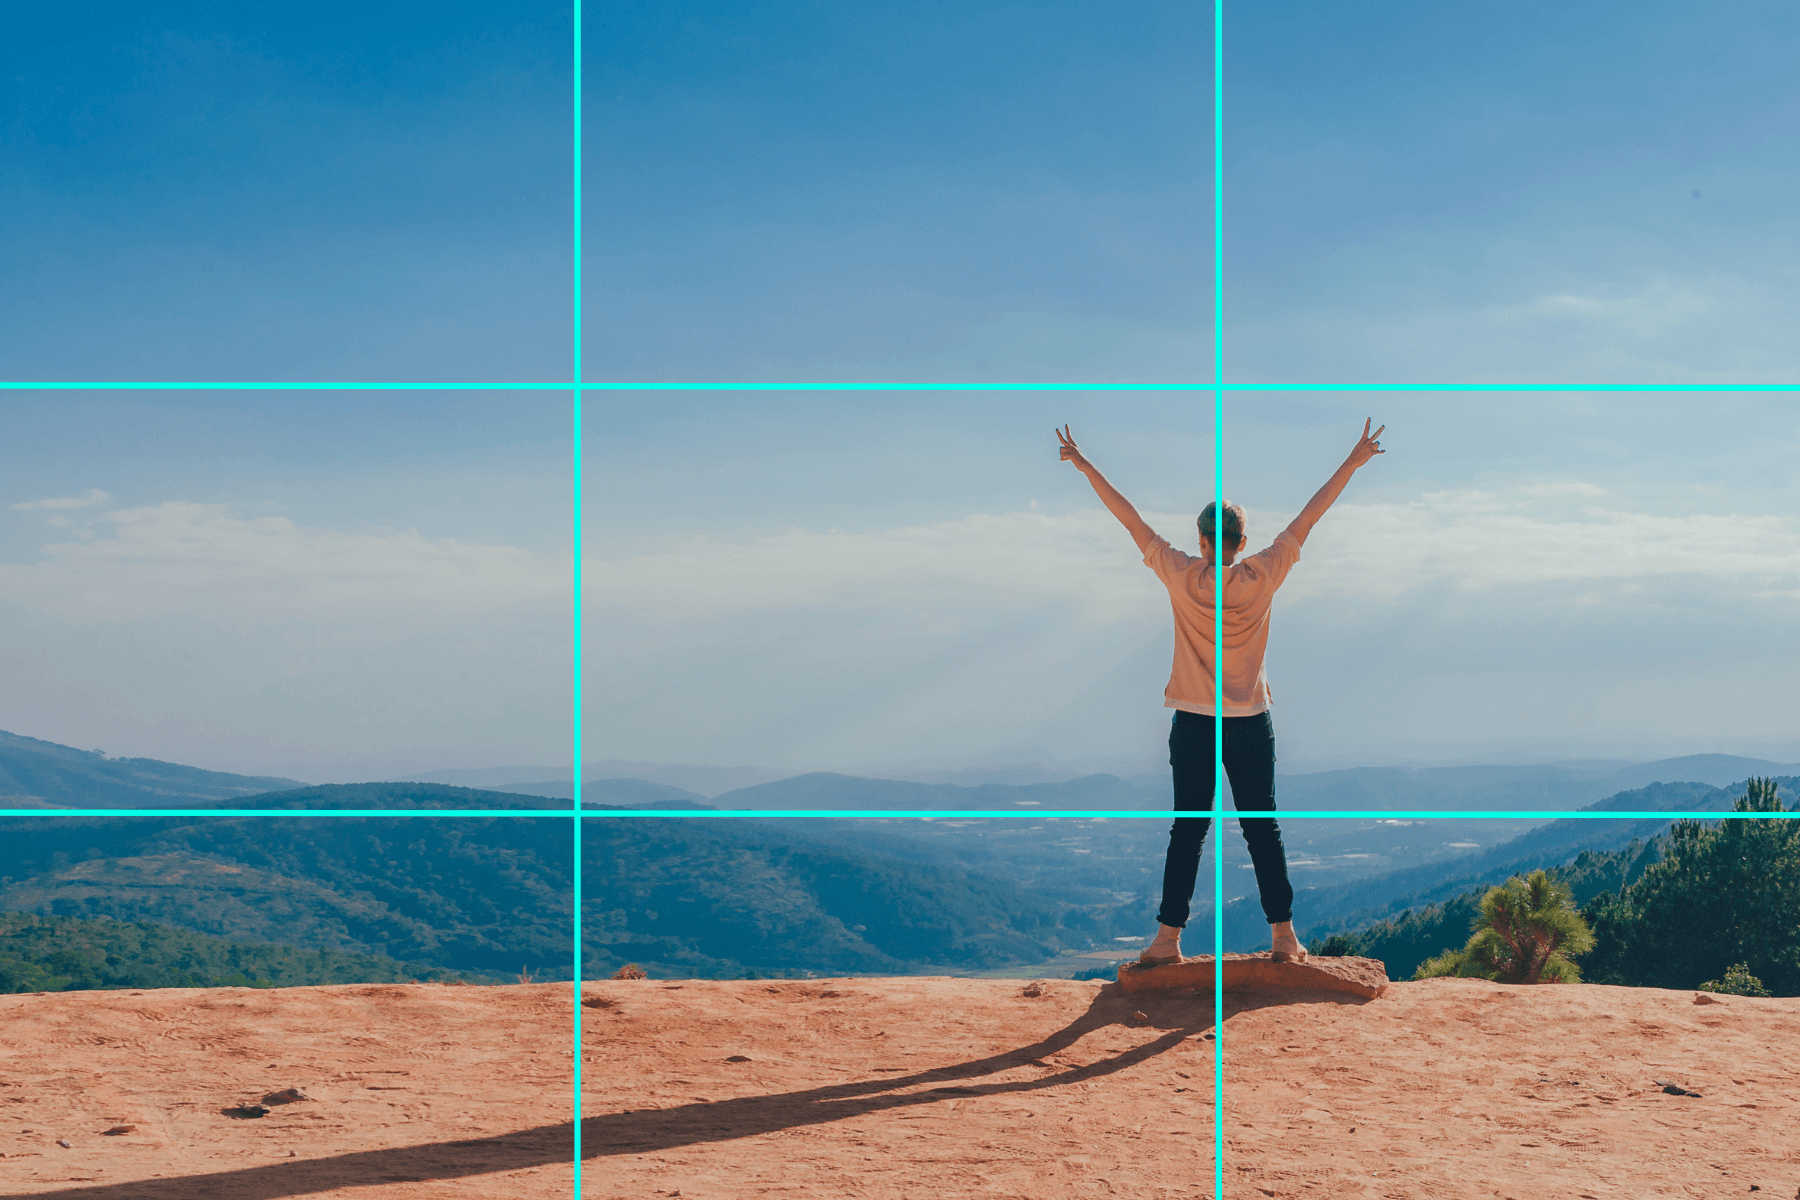 How to Use the Rule of Thirds - B&C Camera